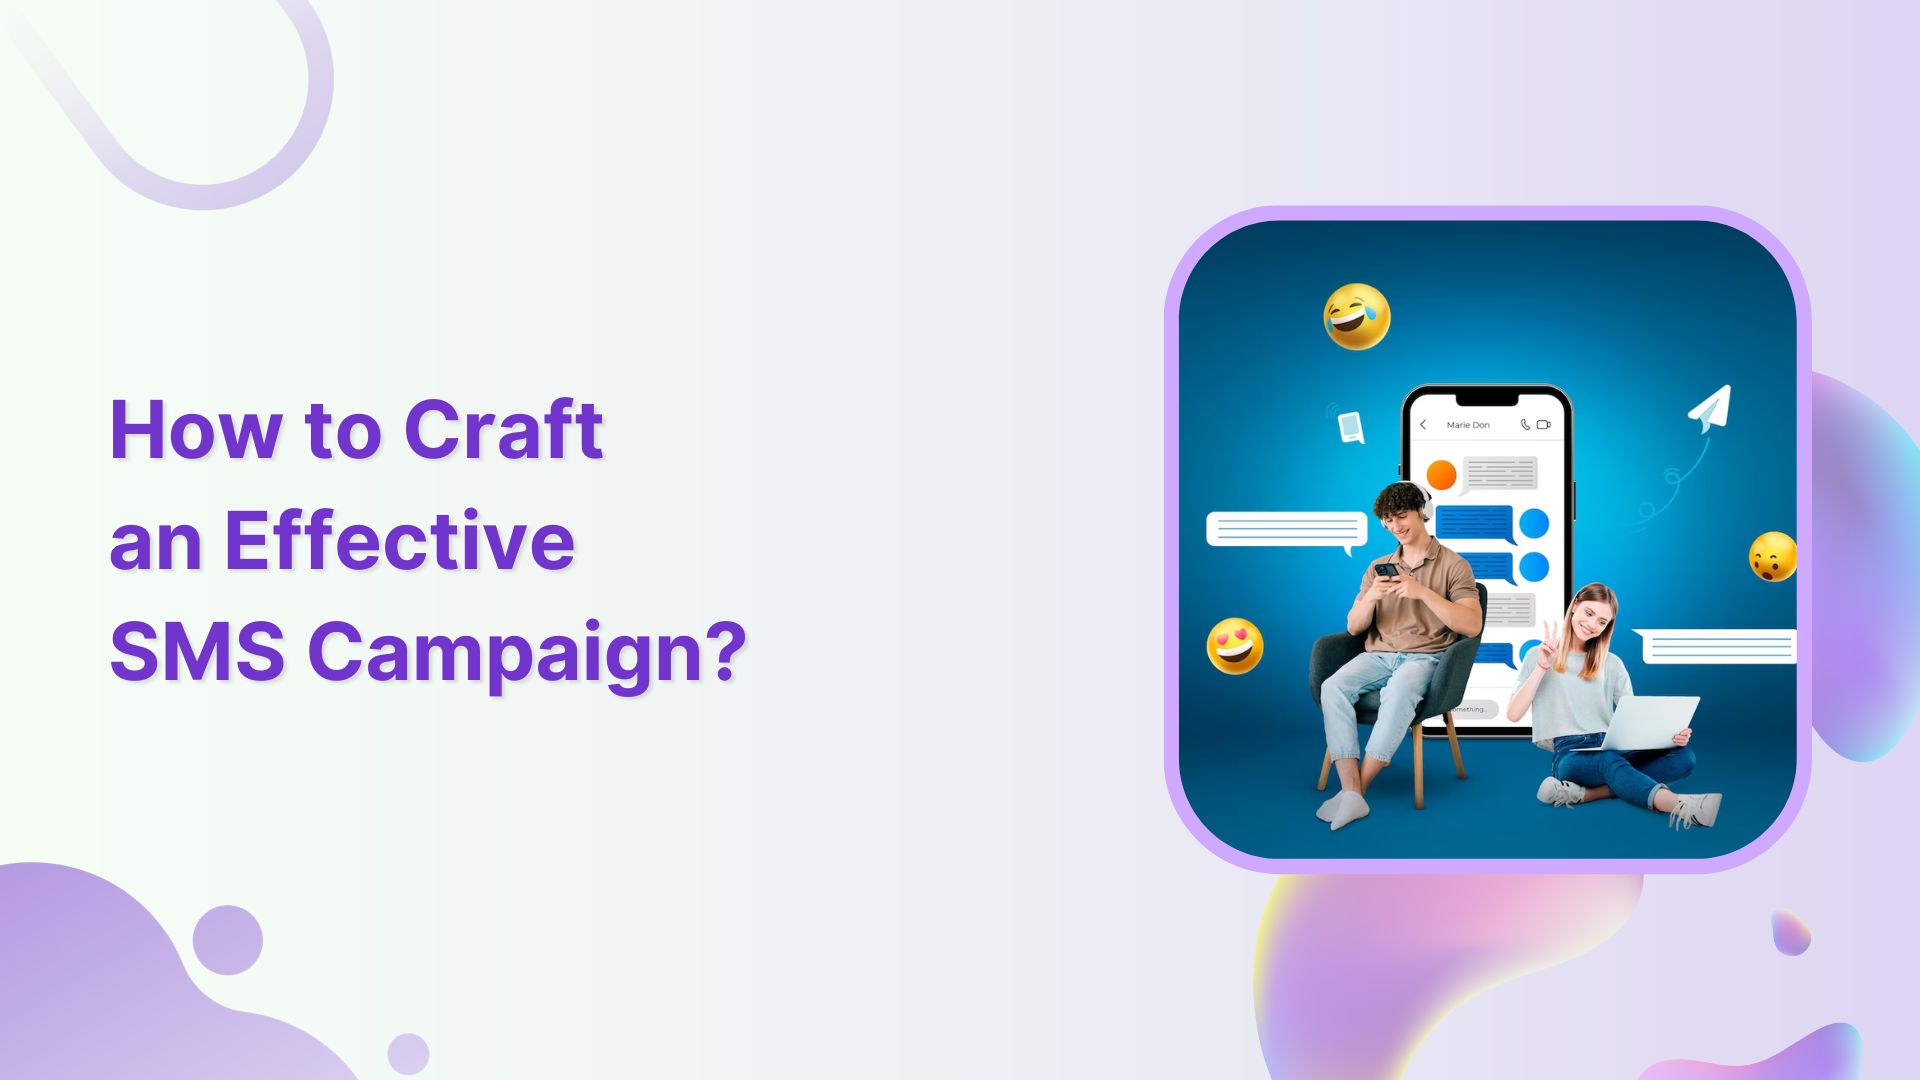 How to Craft an Effective SMS Campaign?